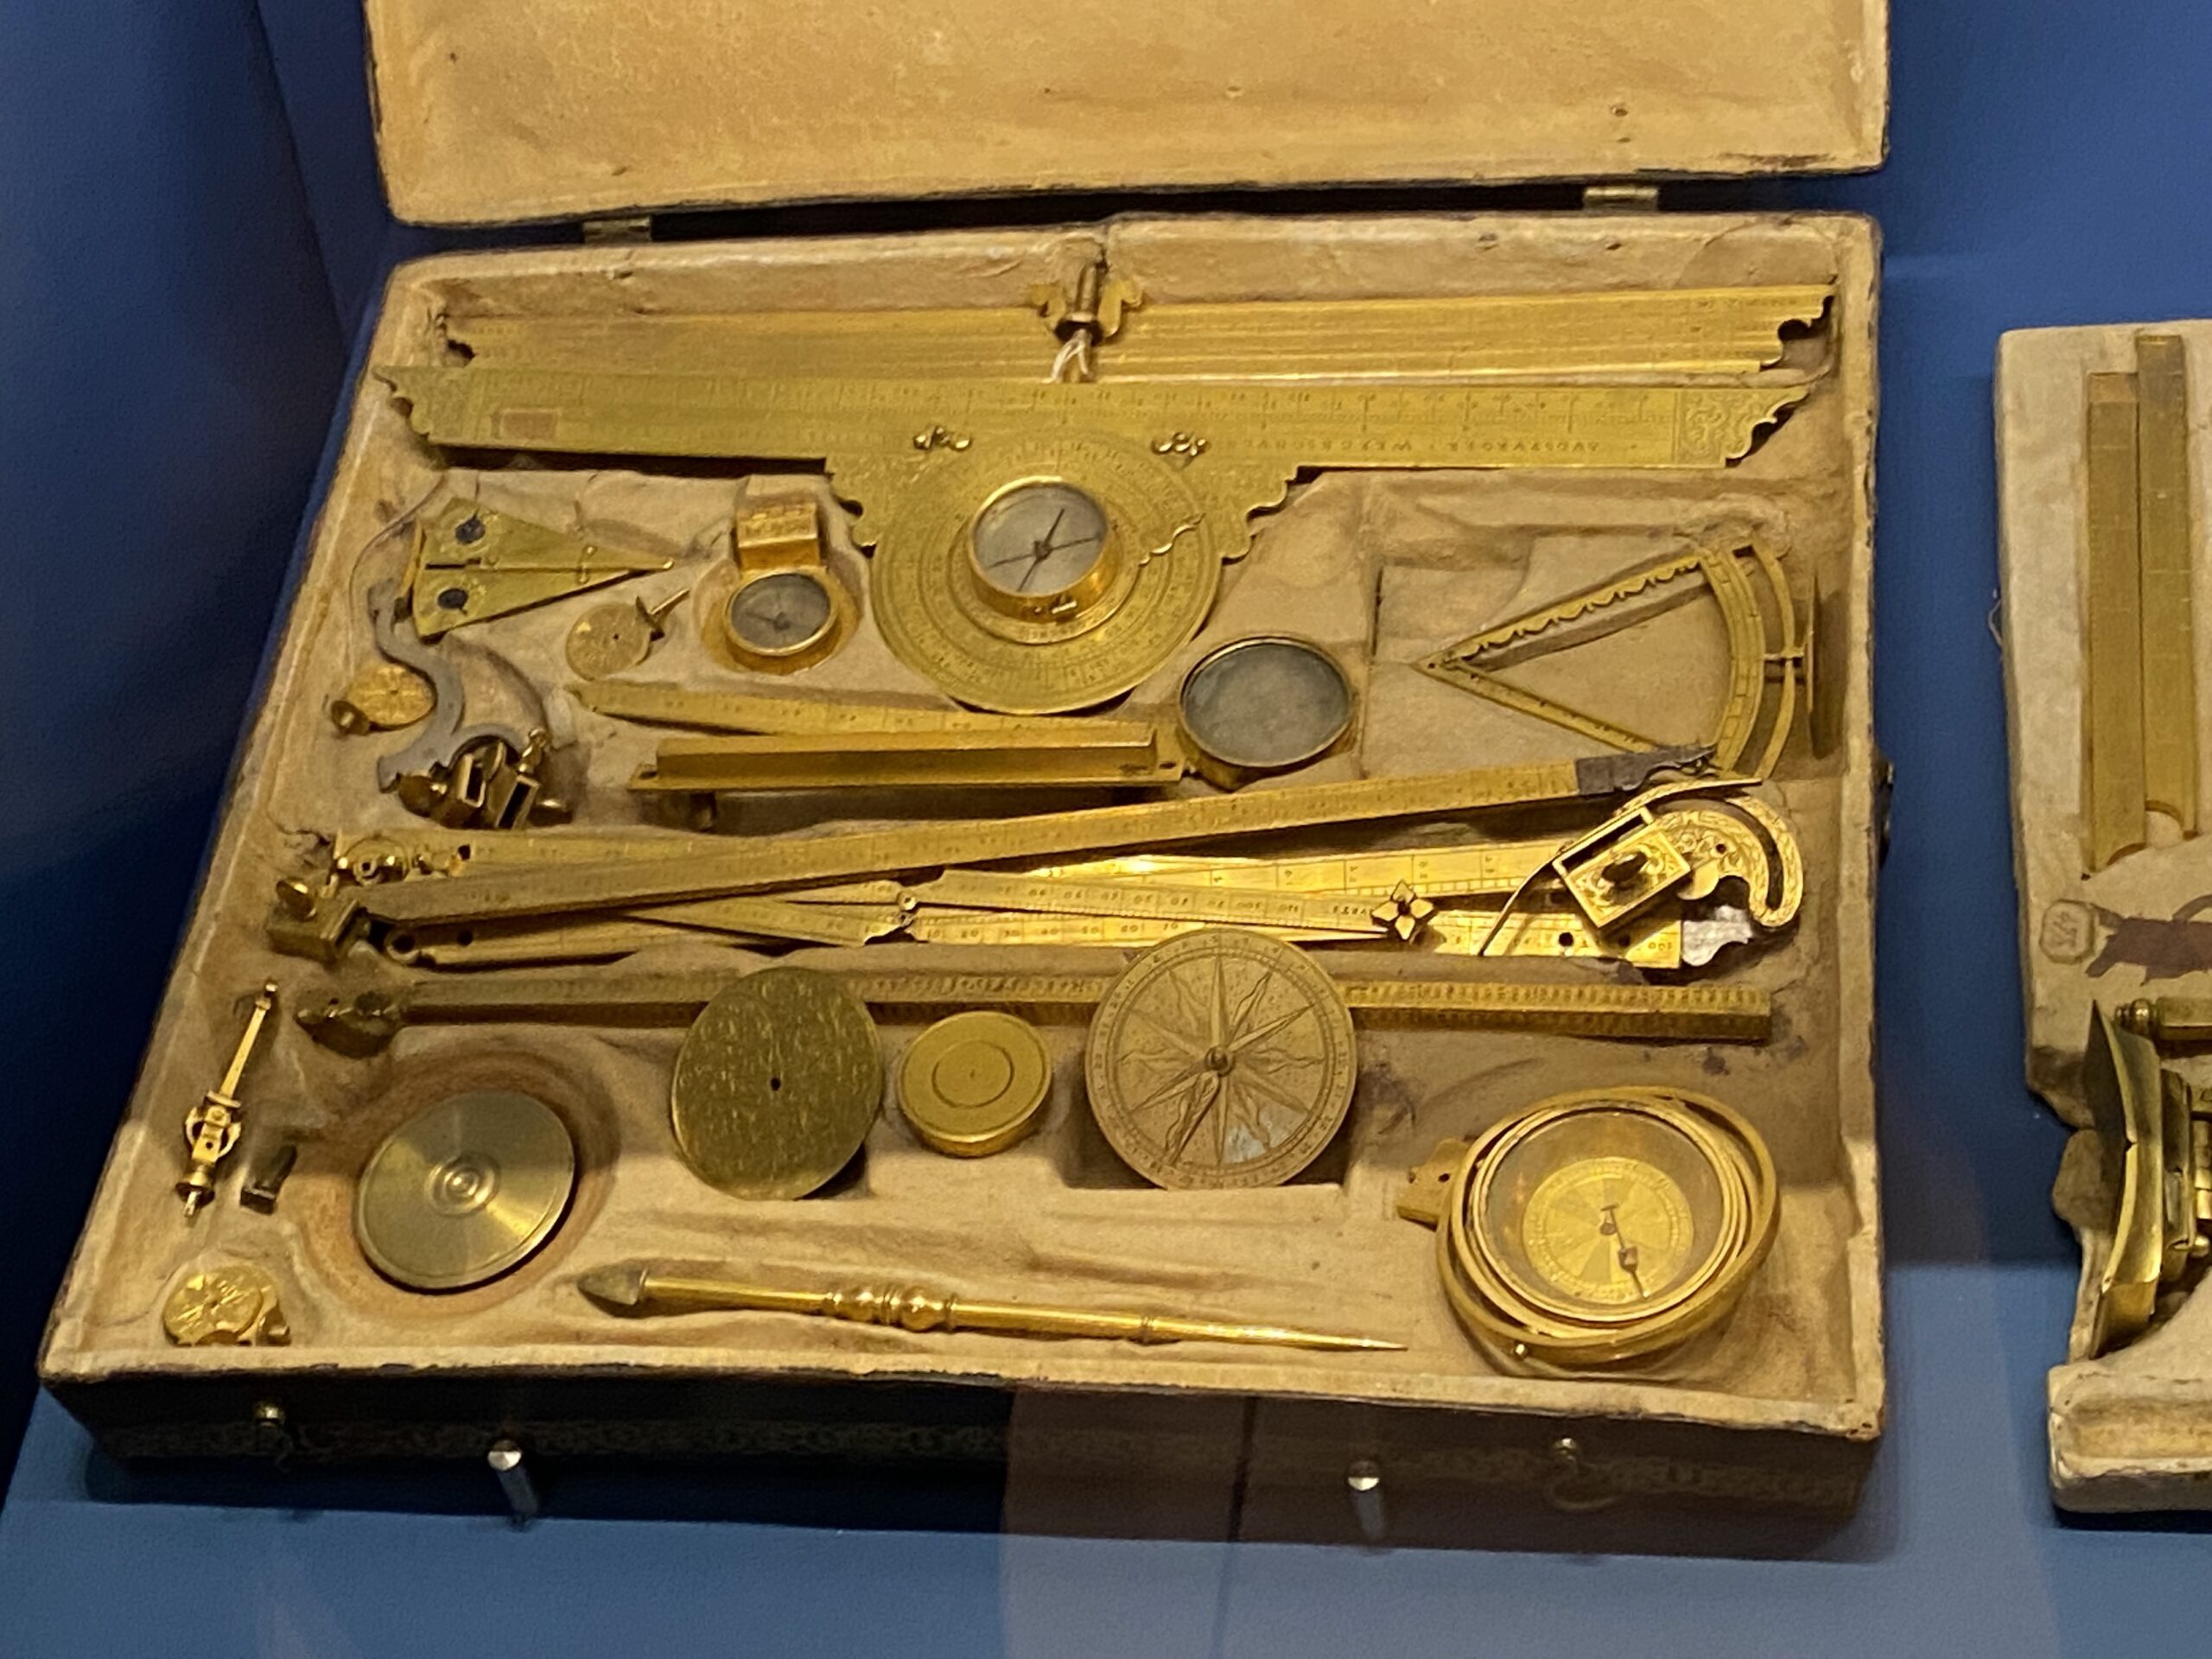 Measuring equipment from the Medici collection displayed in Galileo Museum in Florence